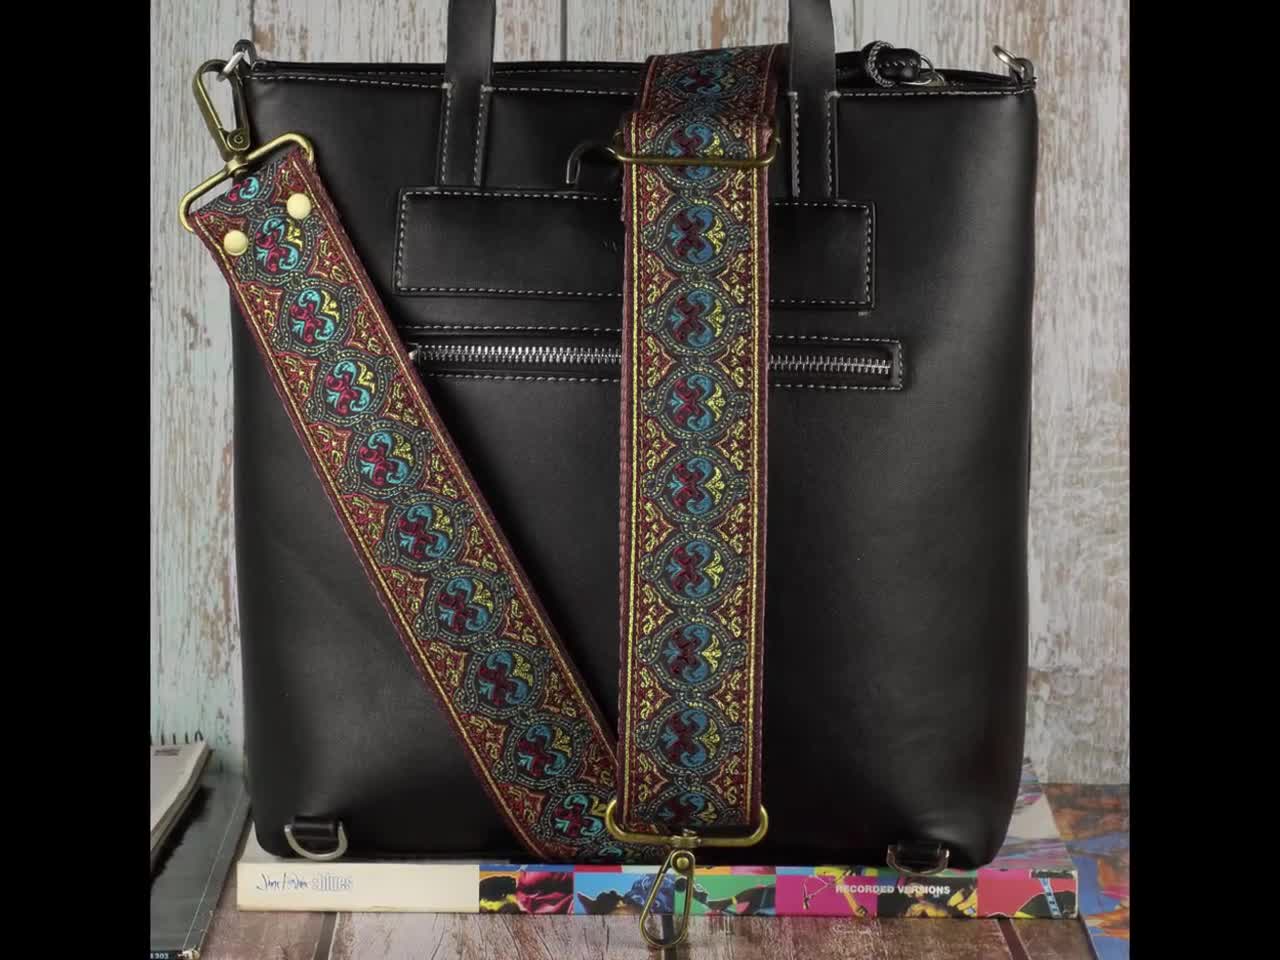 Handbag and purse strap based in hippie guitar straps with Native design